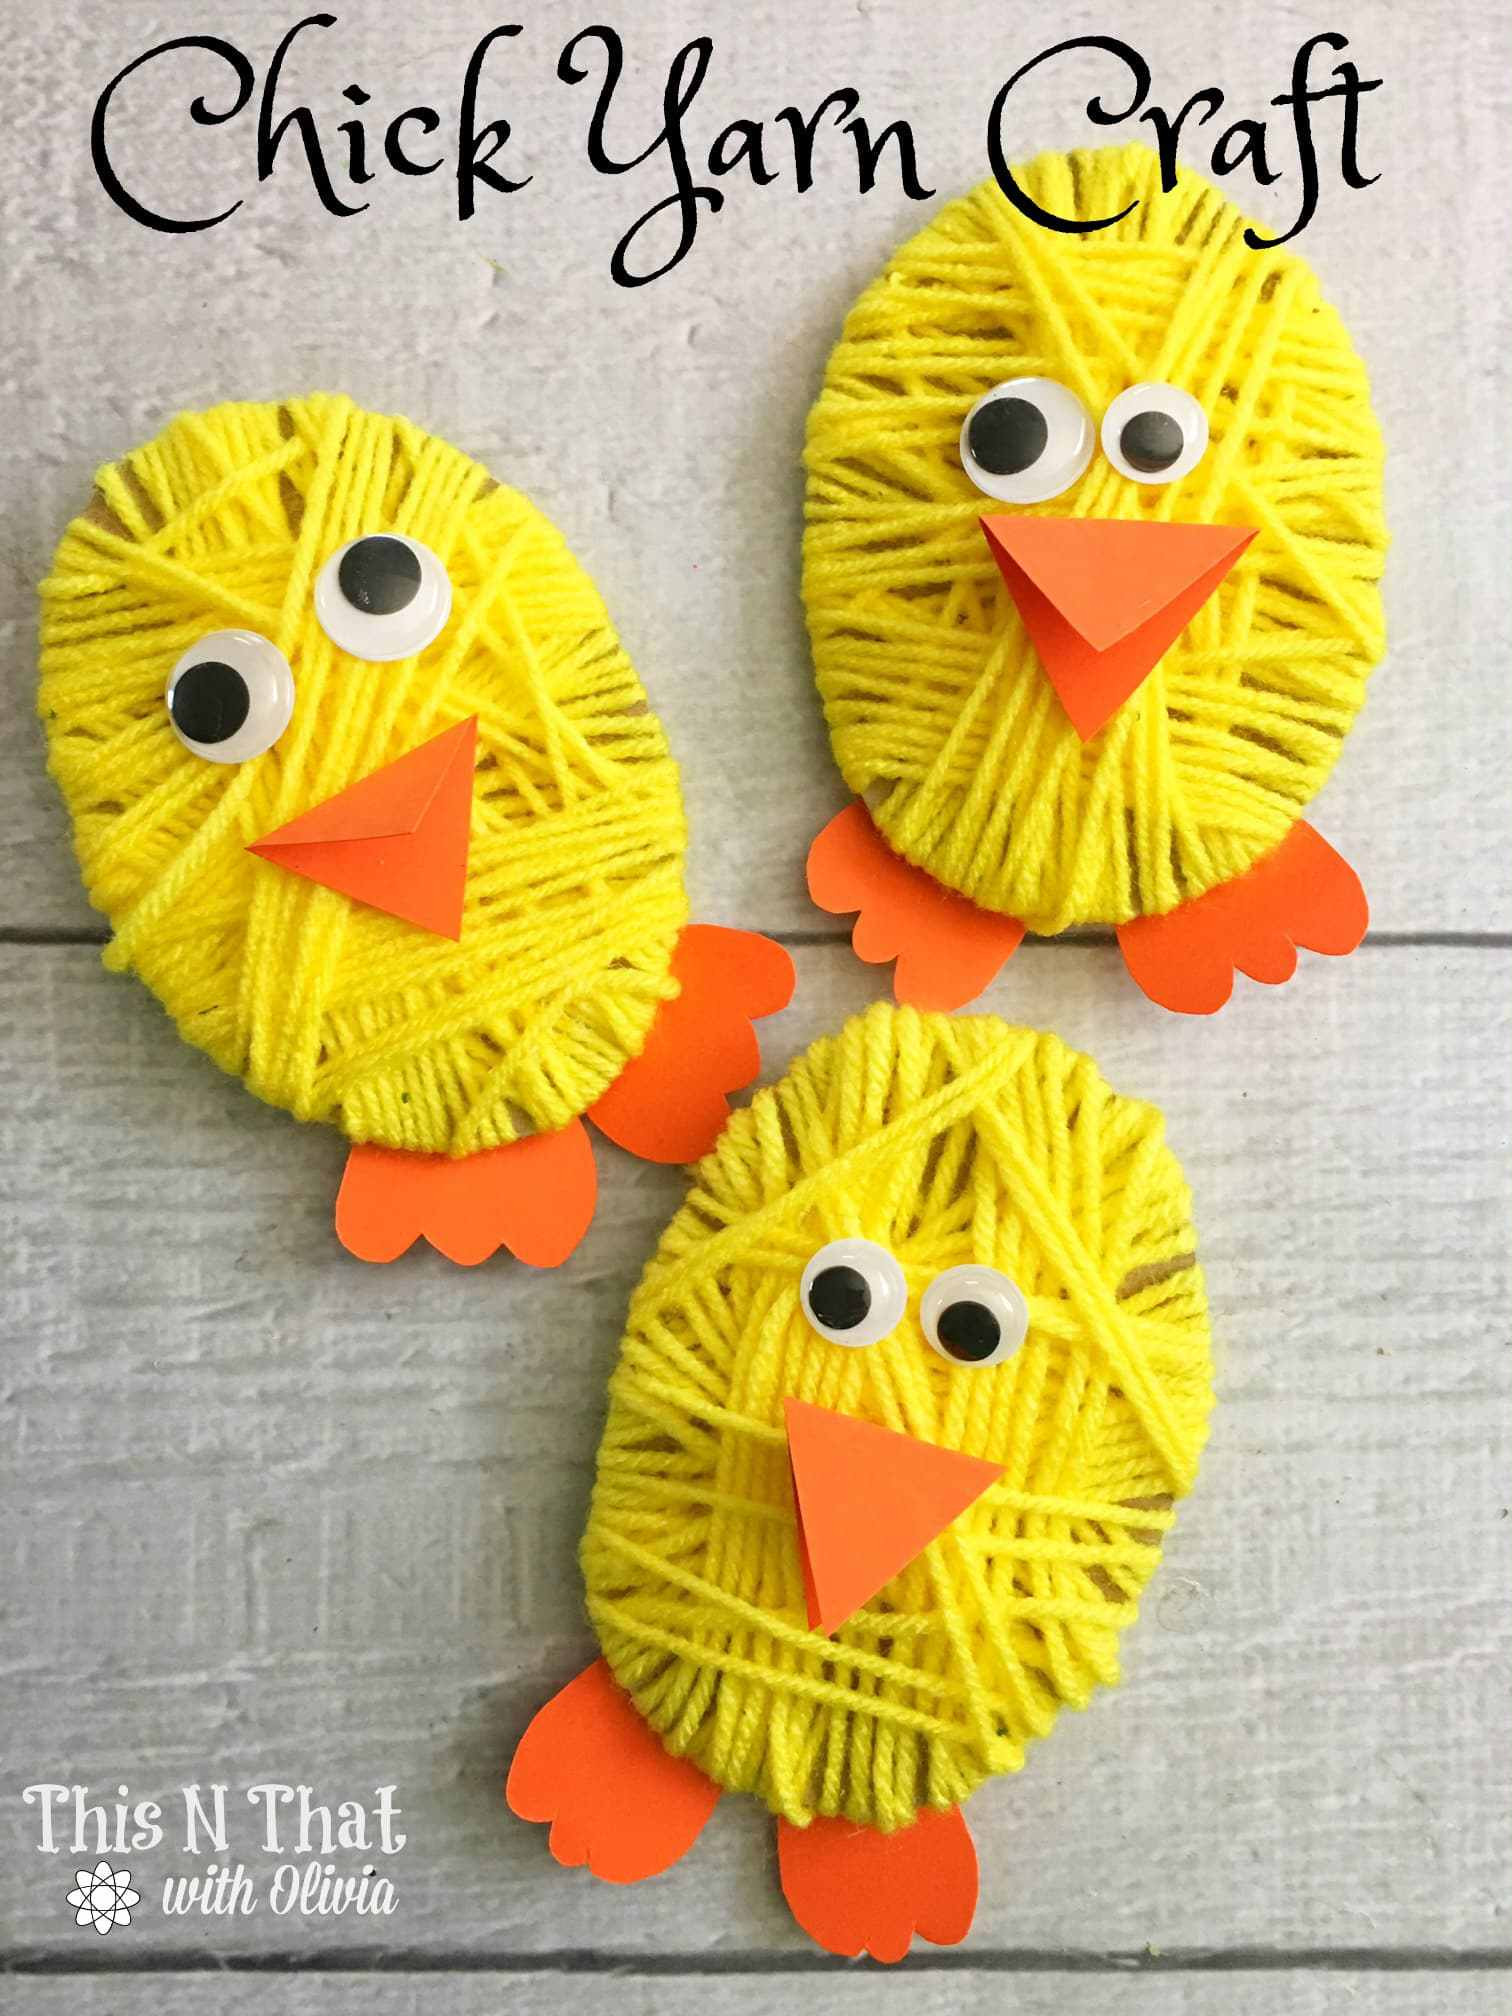 Craft Projects For Preschoolers
 Over 33 Easter Craft Ideas for Kids to Make Simple Cute